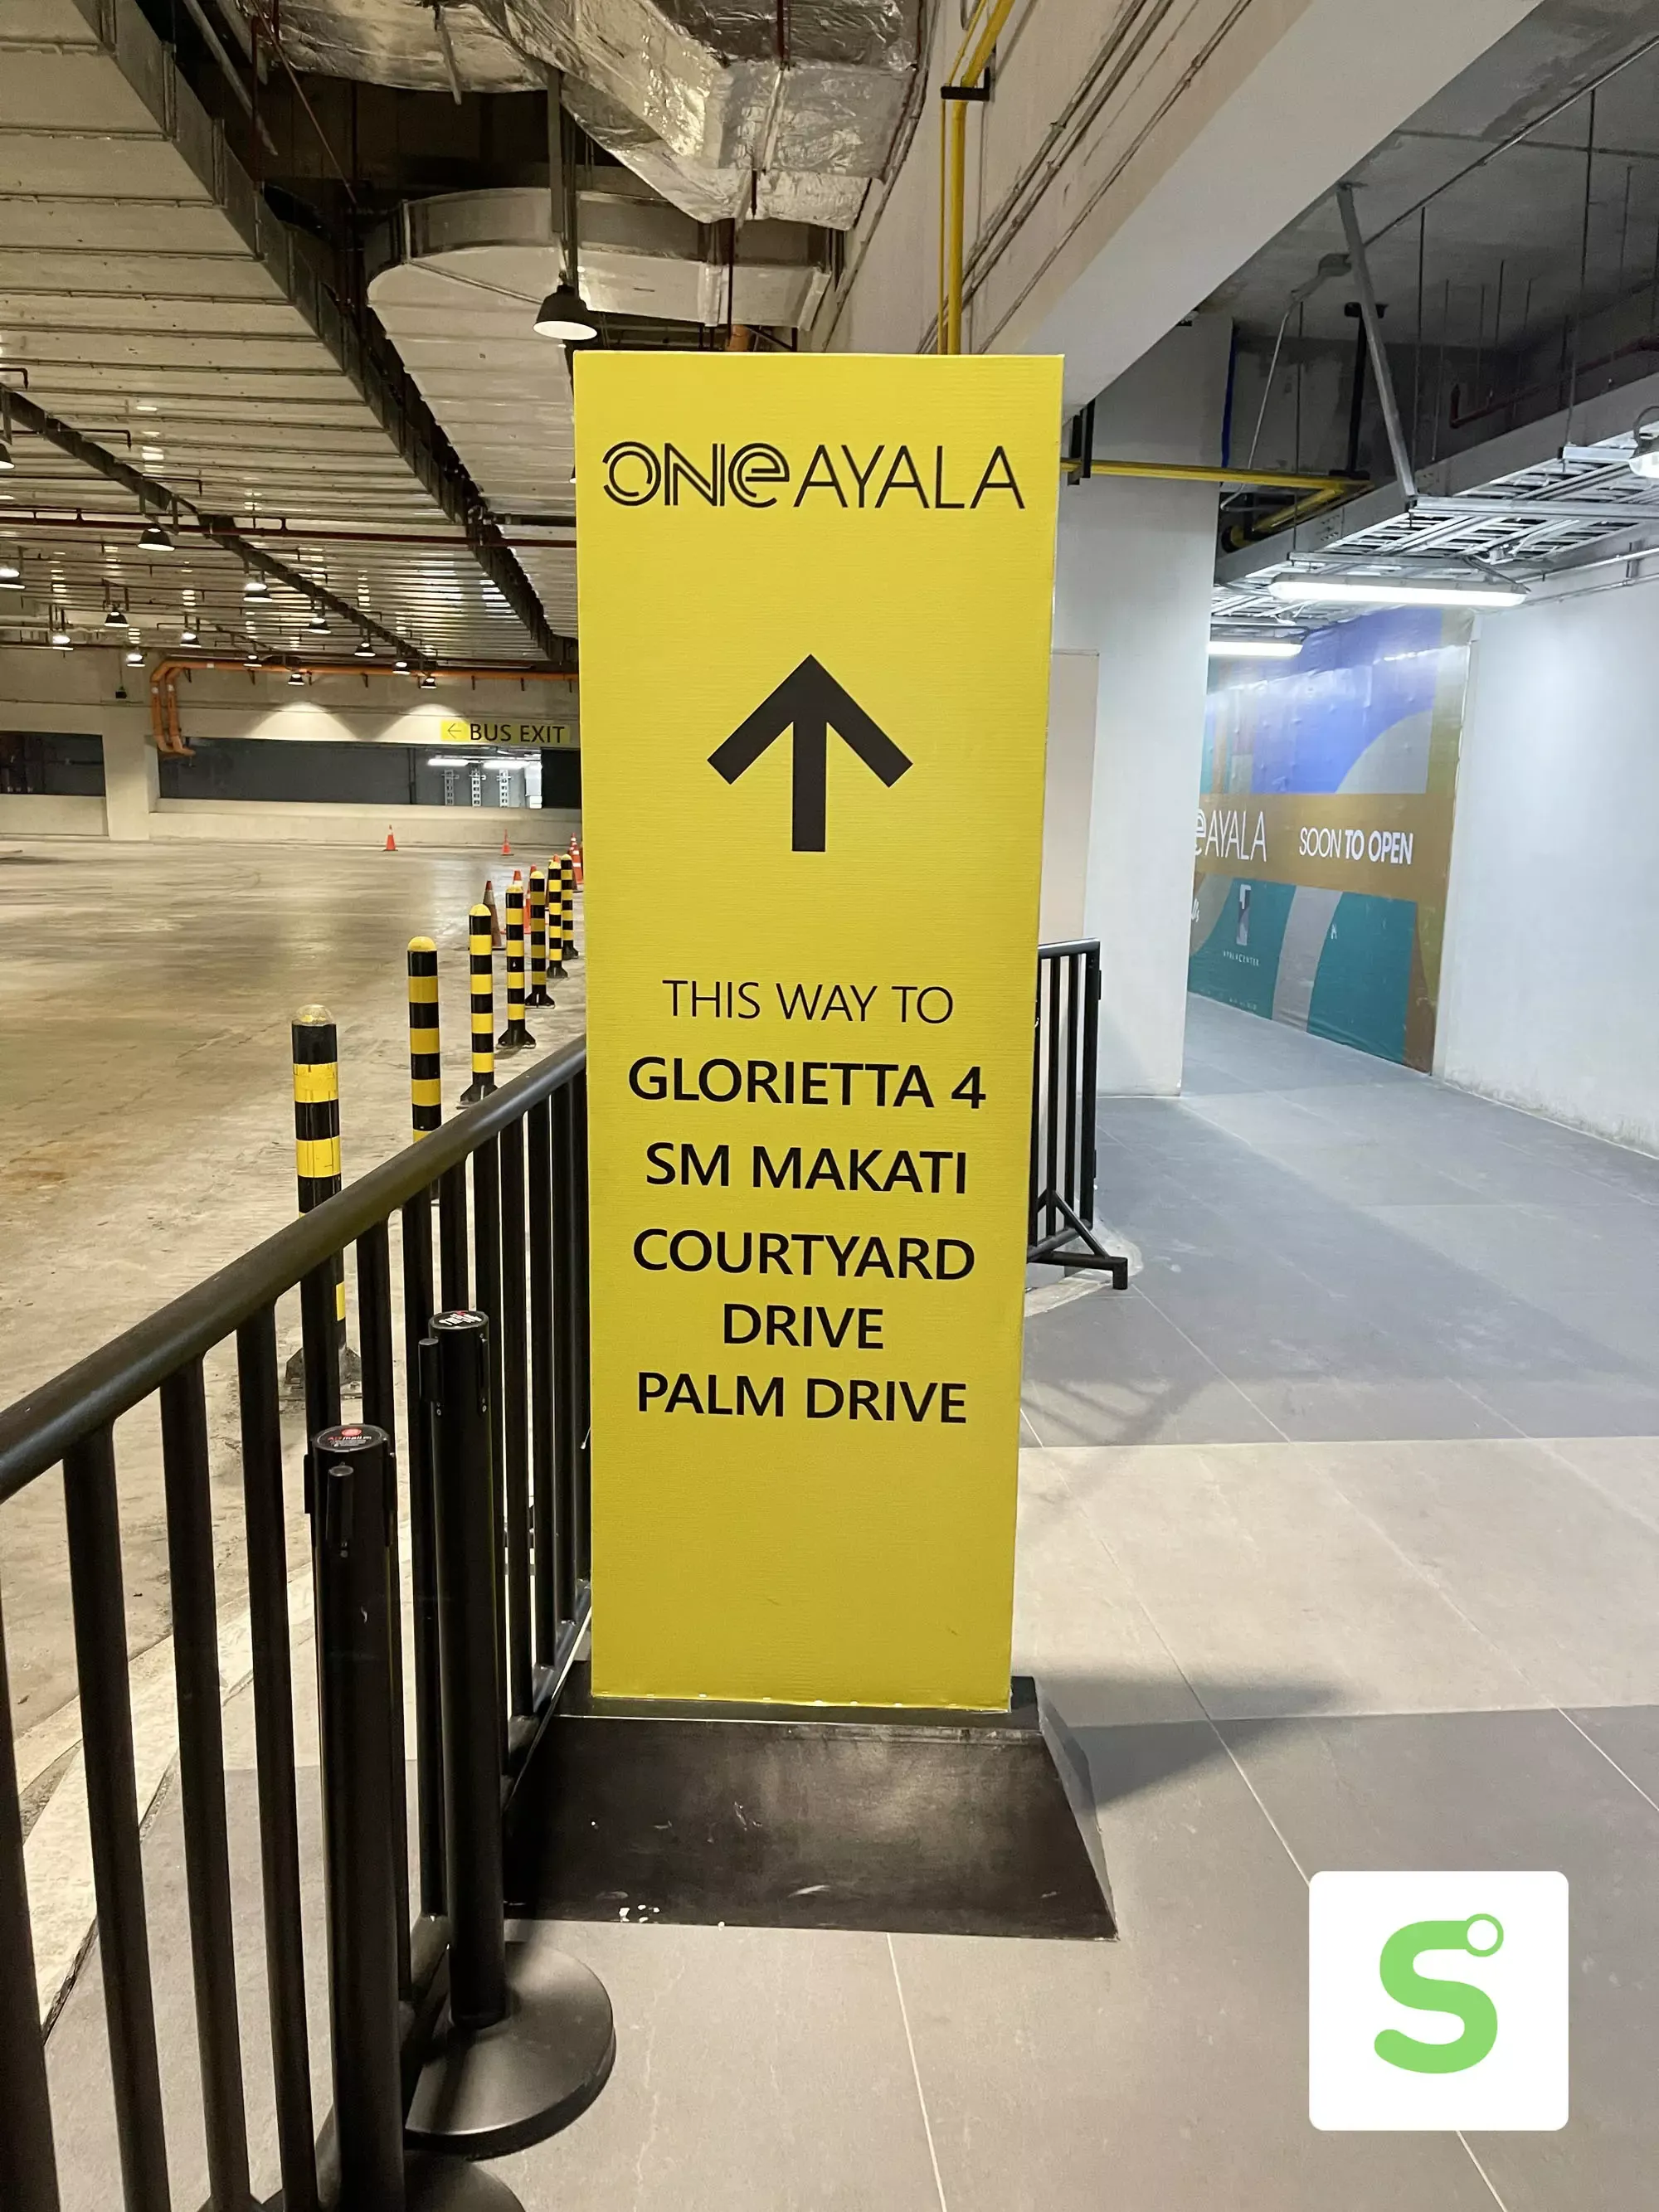 One Ayala Terminal Guide: Routes, Schedule, Fare and Features